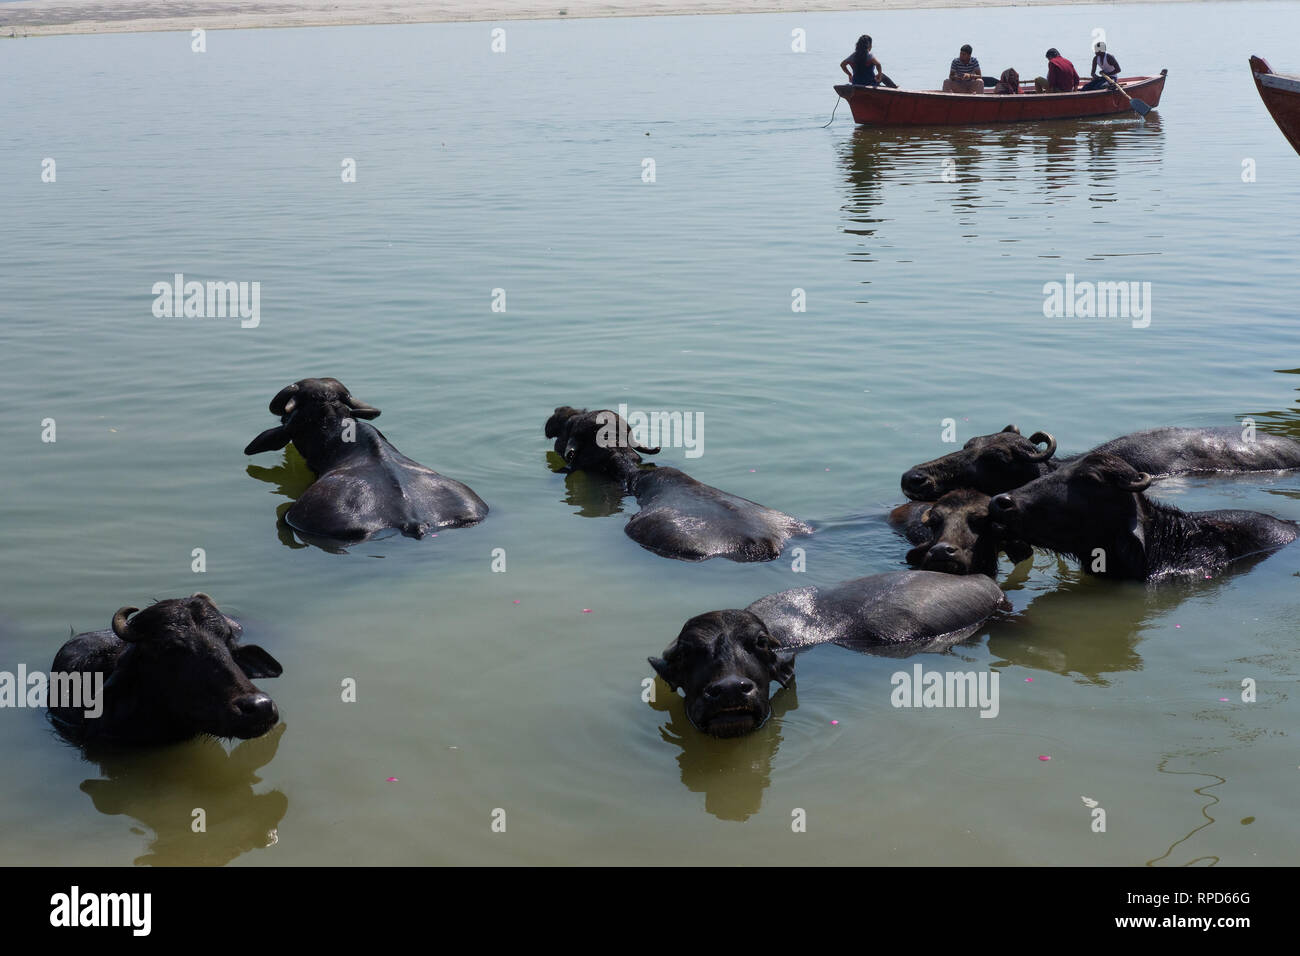 Water buffaloes in the Ganges River in Varanasi, India Stock Photo